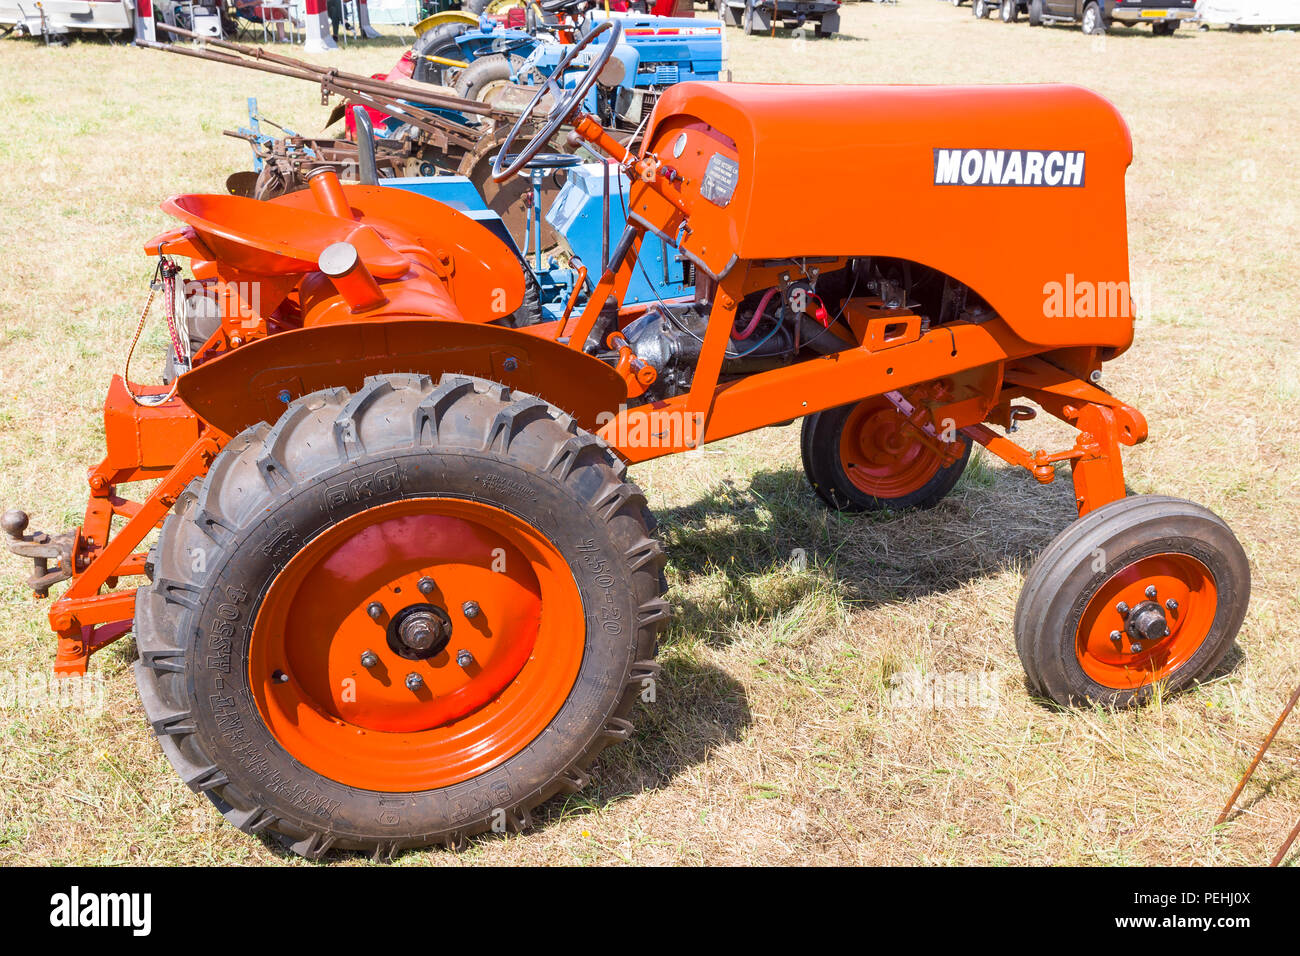 British Singer Monarch farm tractor from the 1950s on show at South Cerney in 2018 Stock Photo